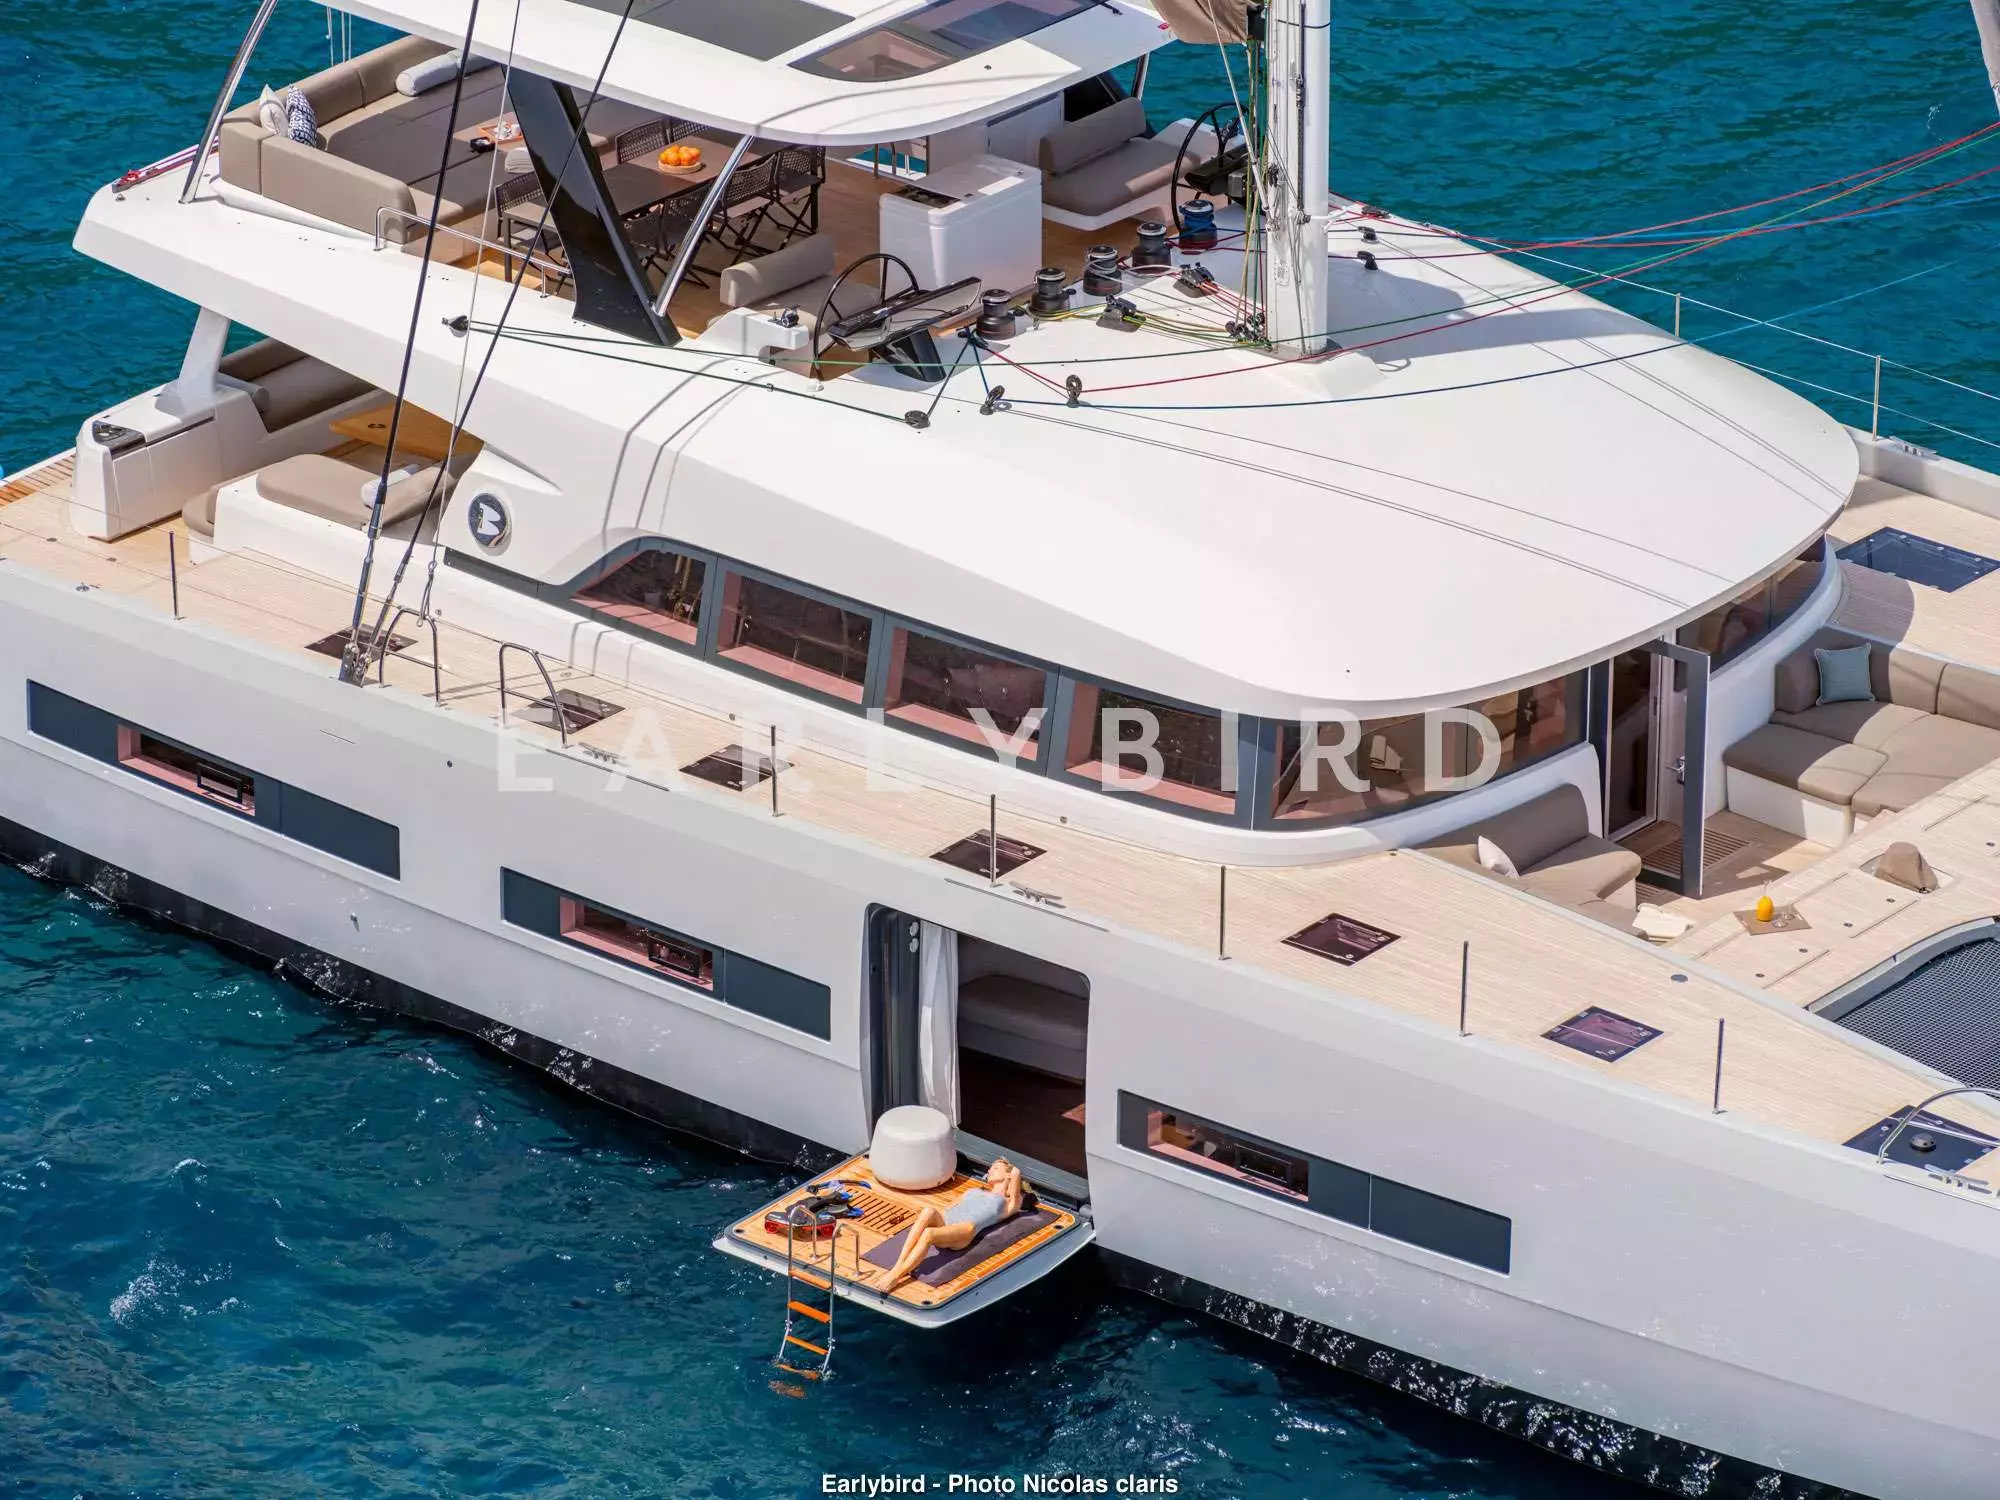 Earlybird by Lagoon - Top rates for a Charter of a private Luxury Catamaran in St Barths